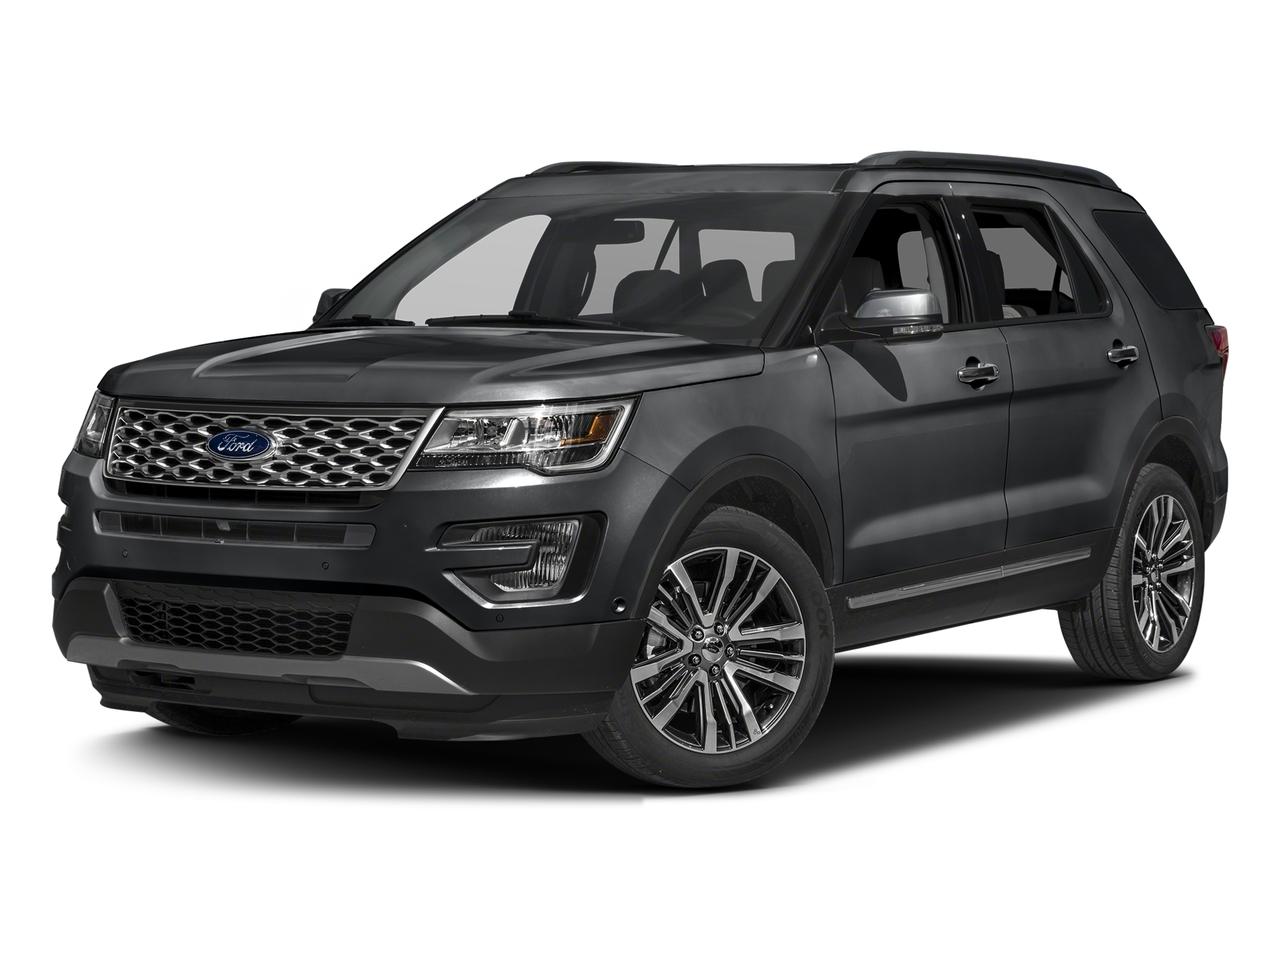 2017 Ford Explorer Vehicle Photo in Plainfield, IL 60586